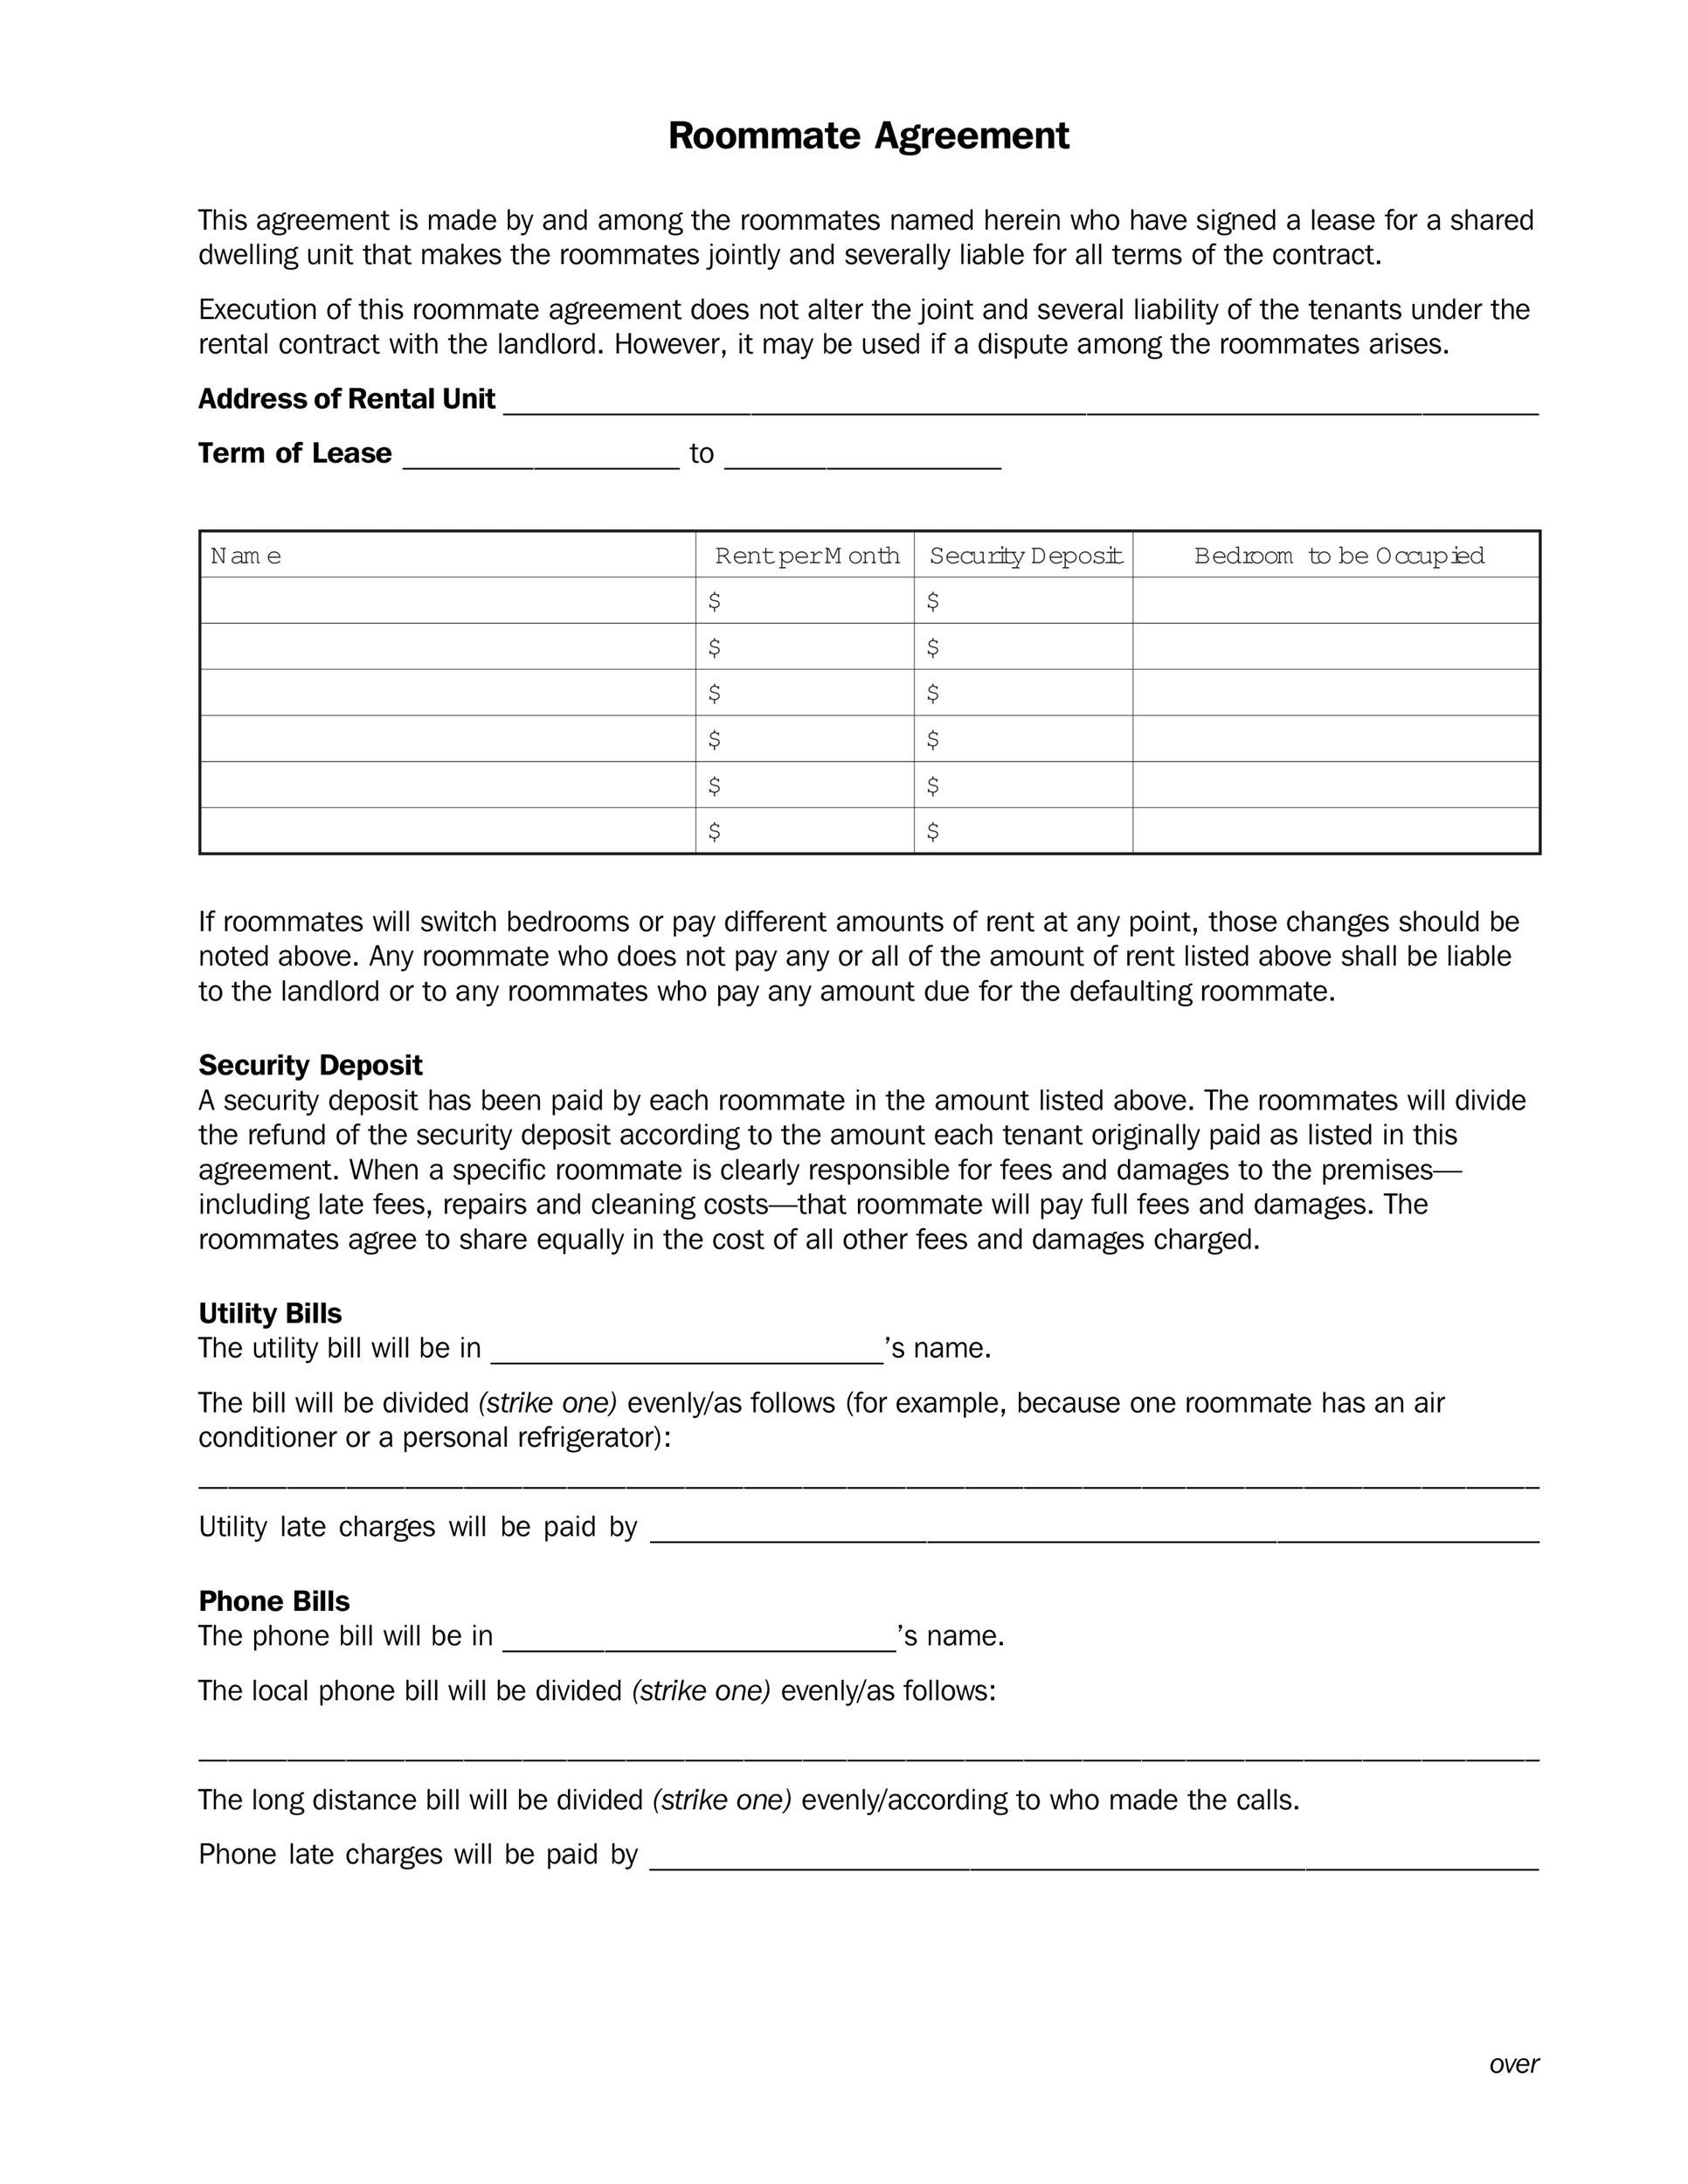 roommate agreement template 06